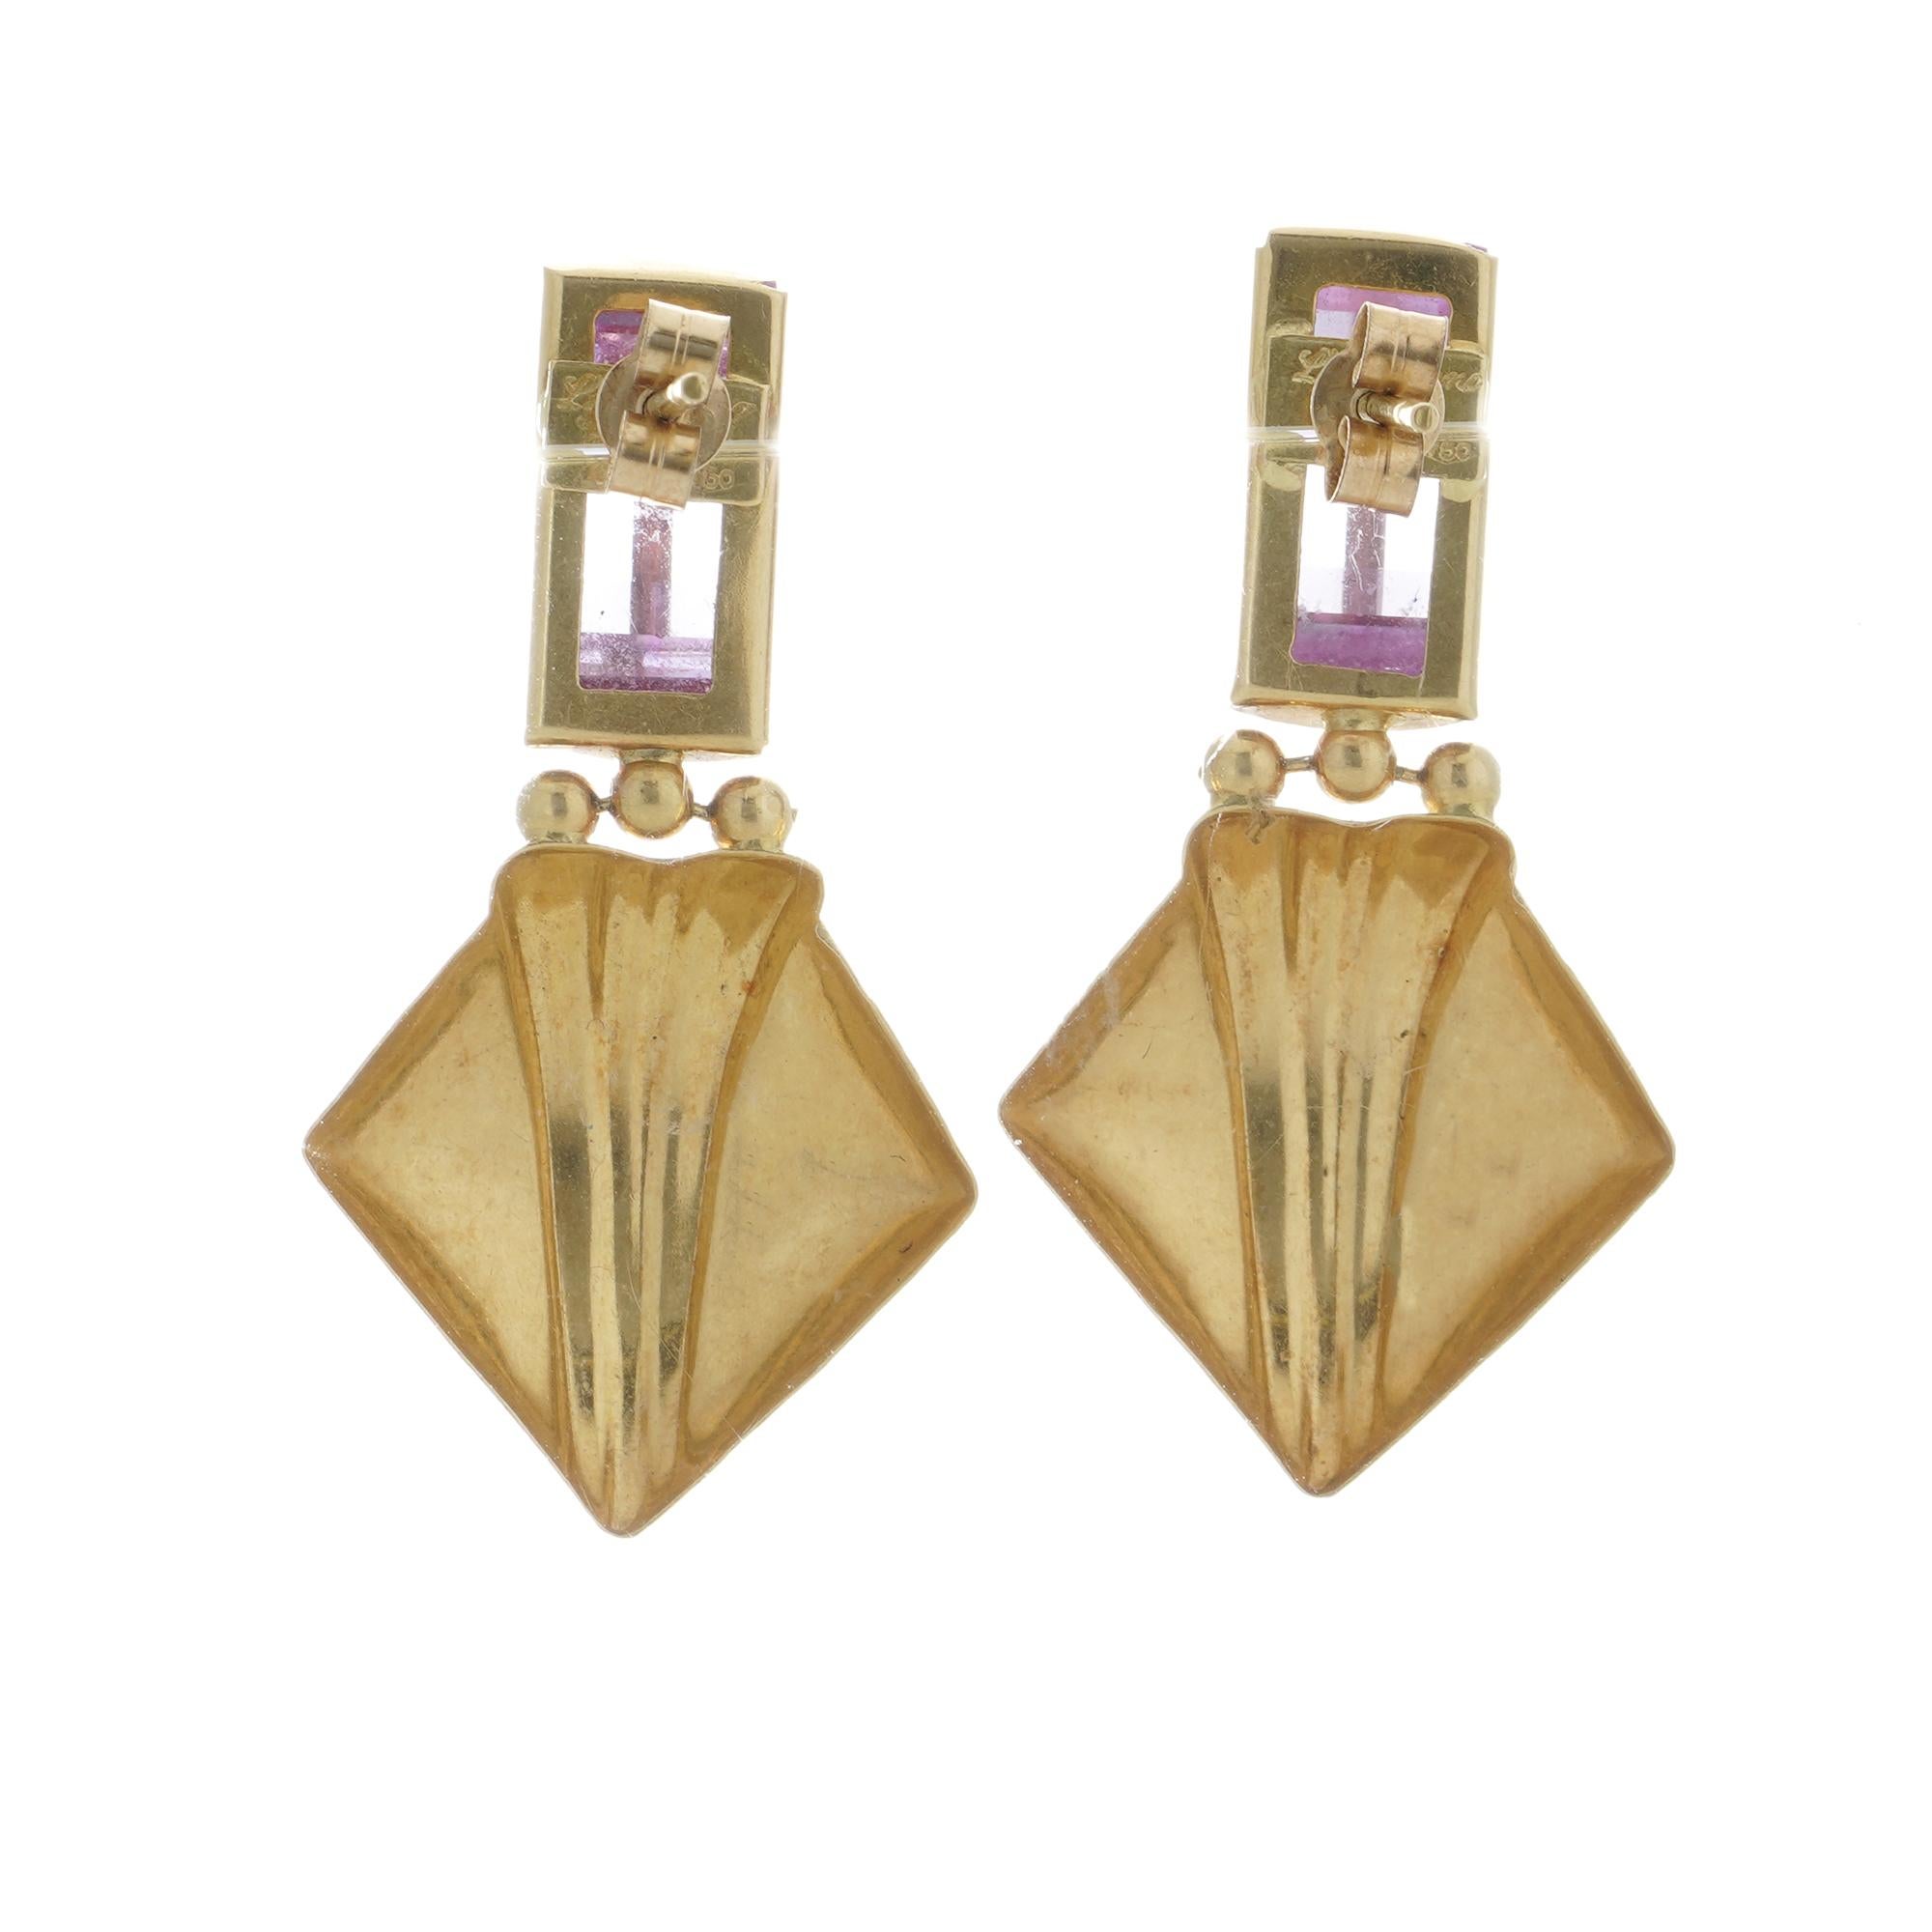 L'Artigiano vintage 18kt. yellow gold pair of stud drop earrings with rock crystal. 
Made in Italy, circa 1970 - 1980's 
Hallmarked with 750, Italian hallmarks, L'Artigiano mark.  

Dimensions -
Weight: 9.00 grams
Earring size: 3.5 x 2 x  0.5 cm